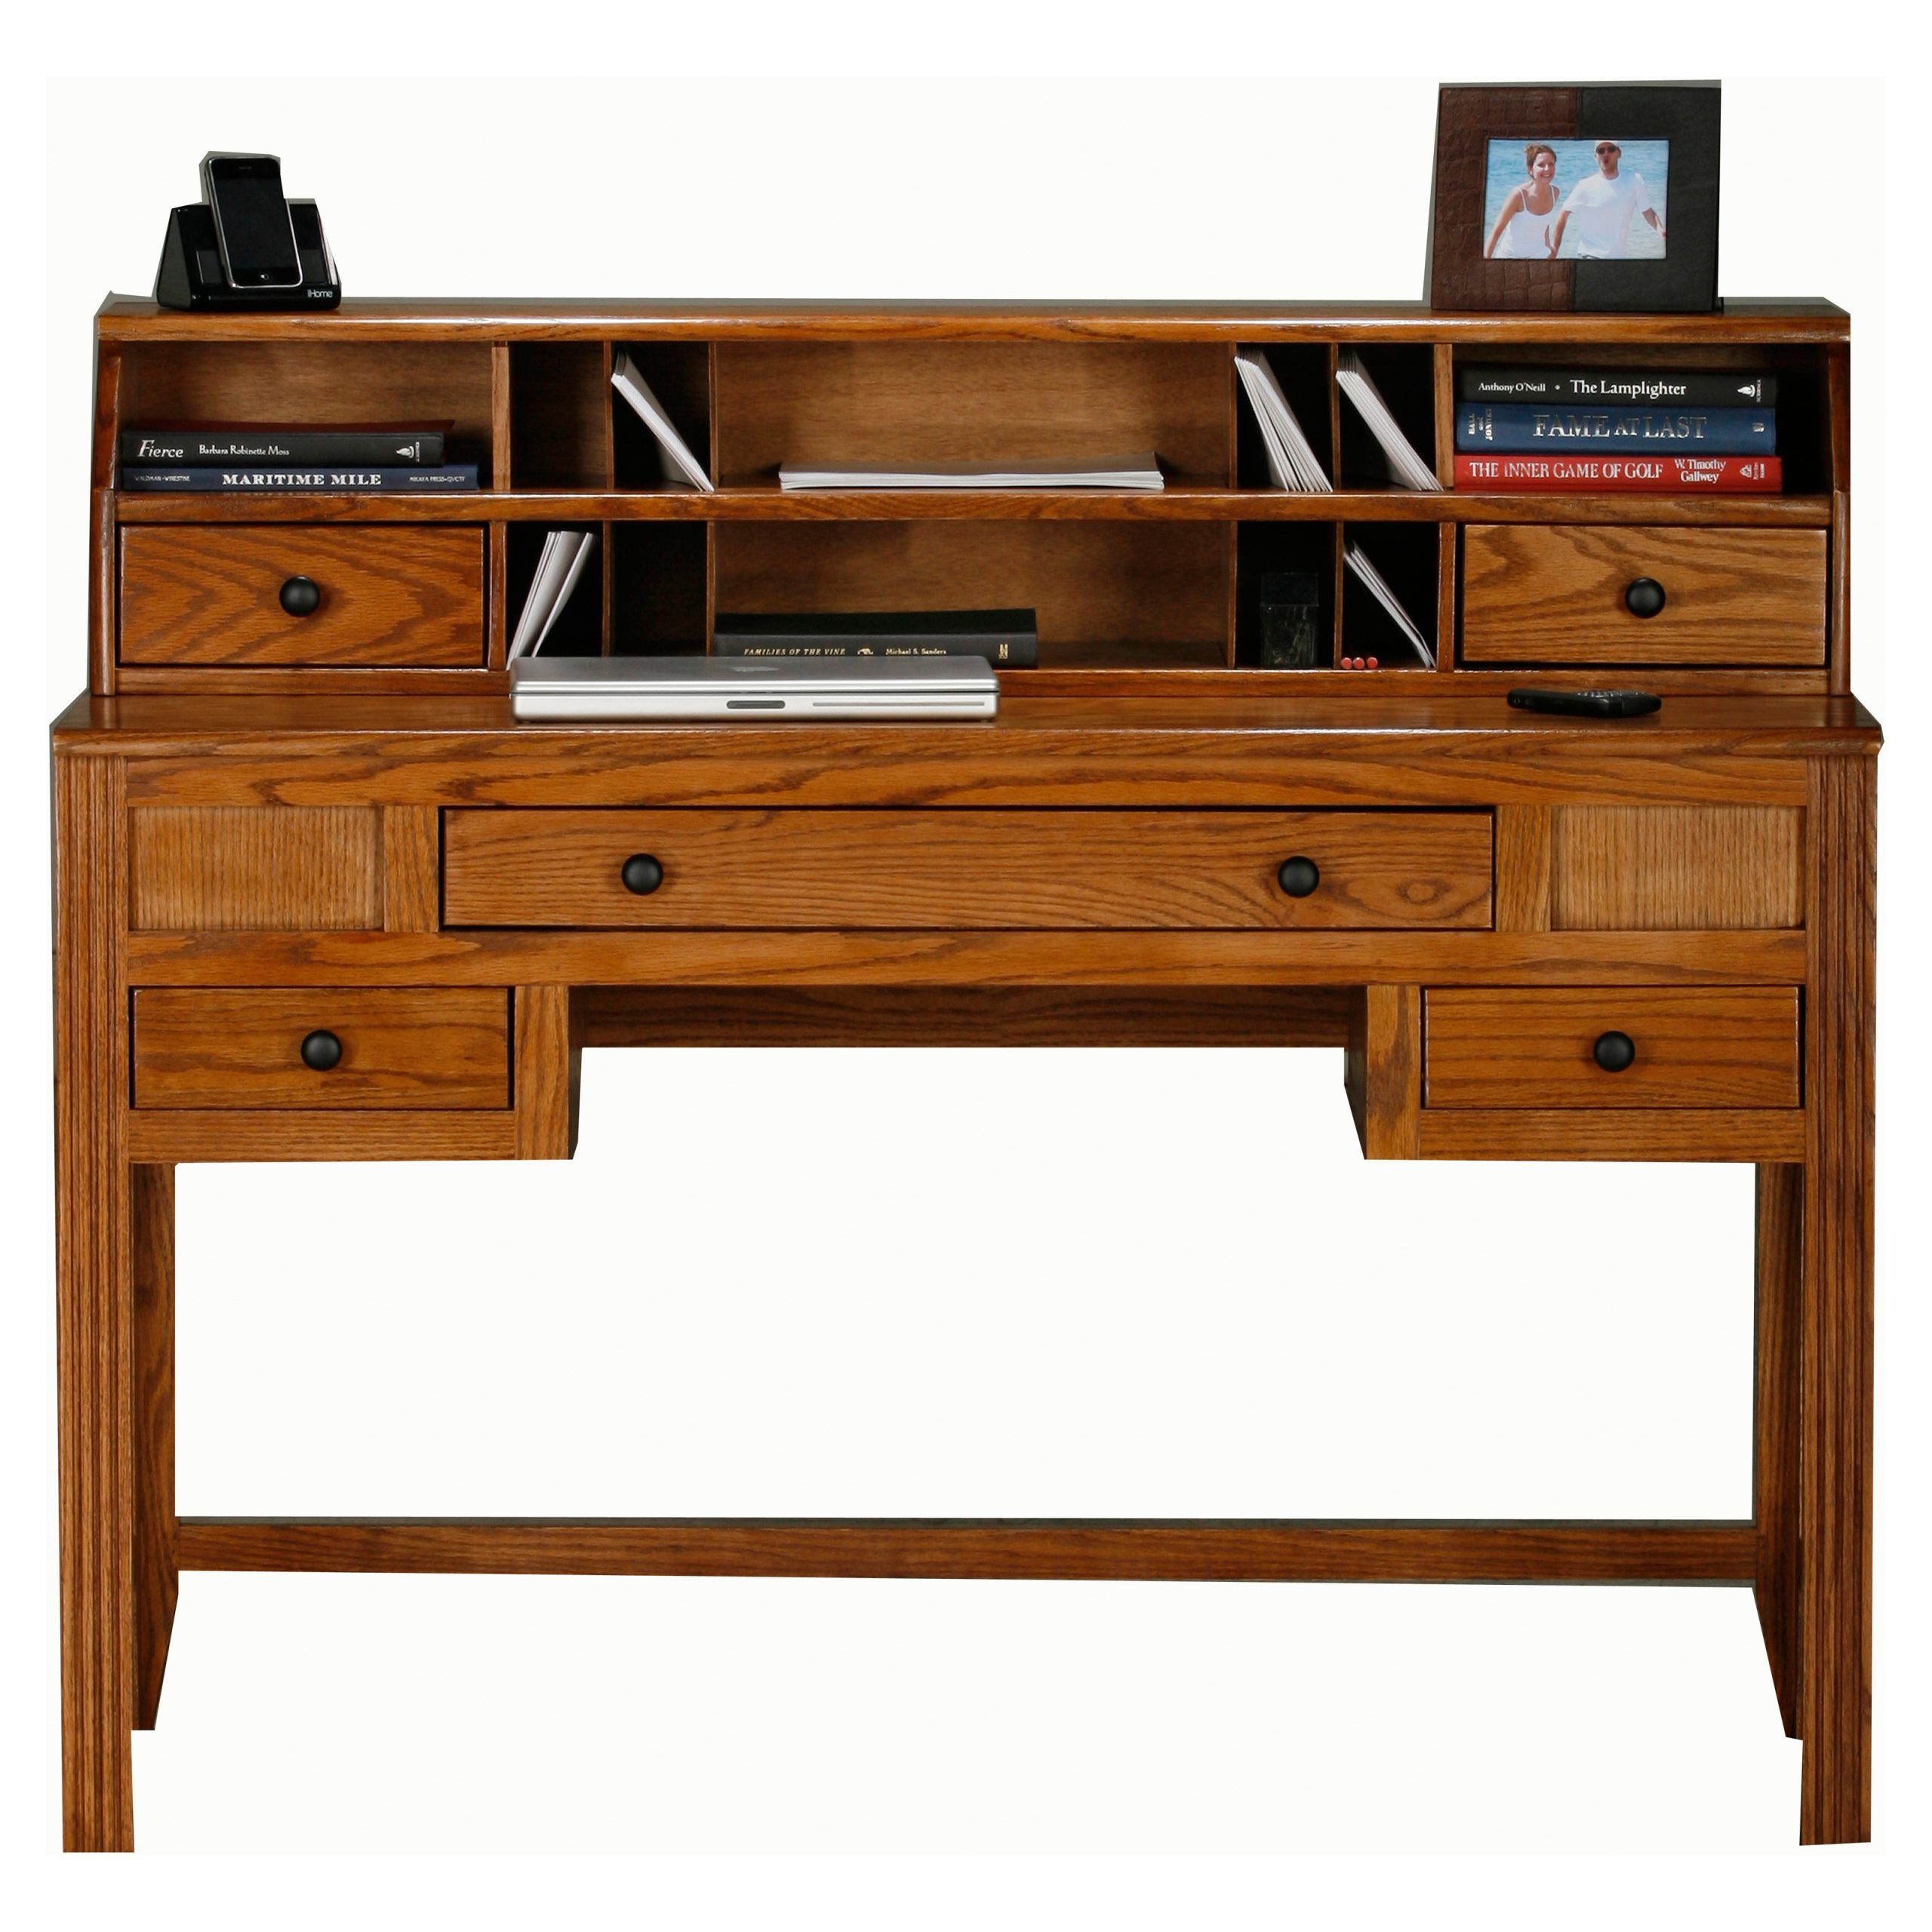 Eagle Furniture Oak Ridge Customizable Writing Desk With Optional Hutch Intended For Weathered Oak Wood Writing Desks (View 11 of 15)